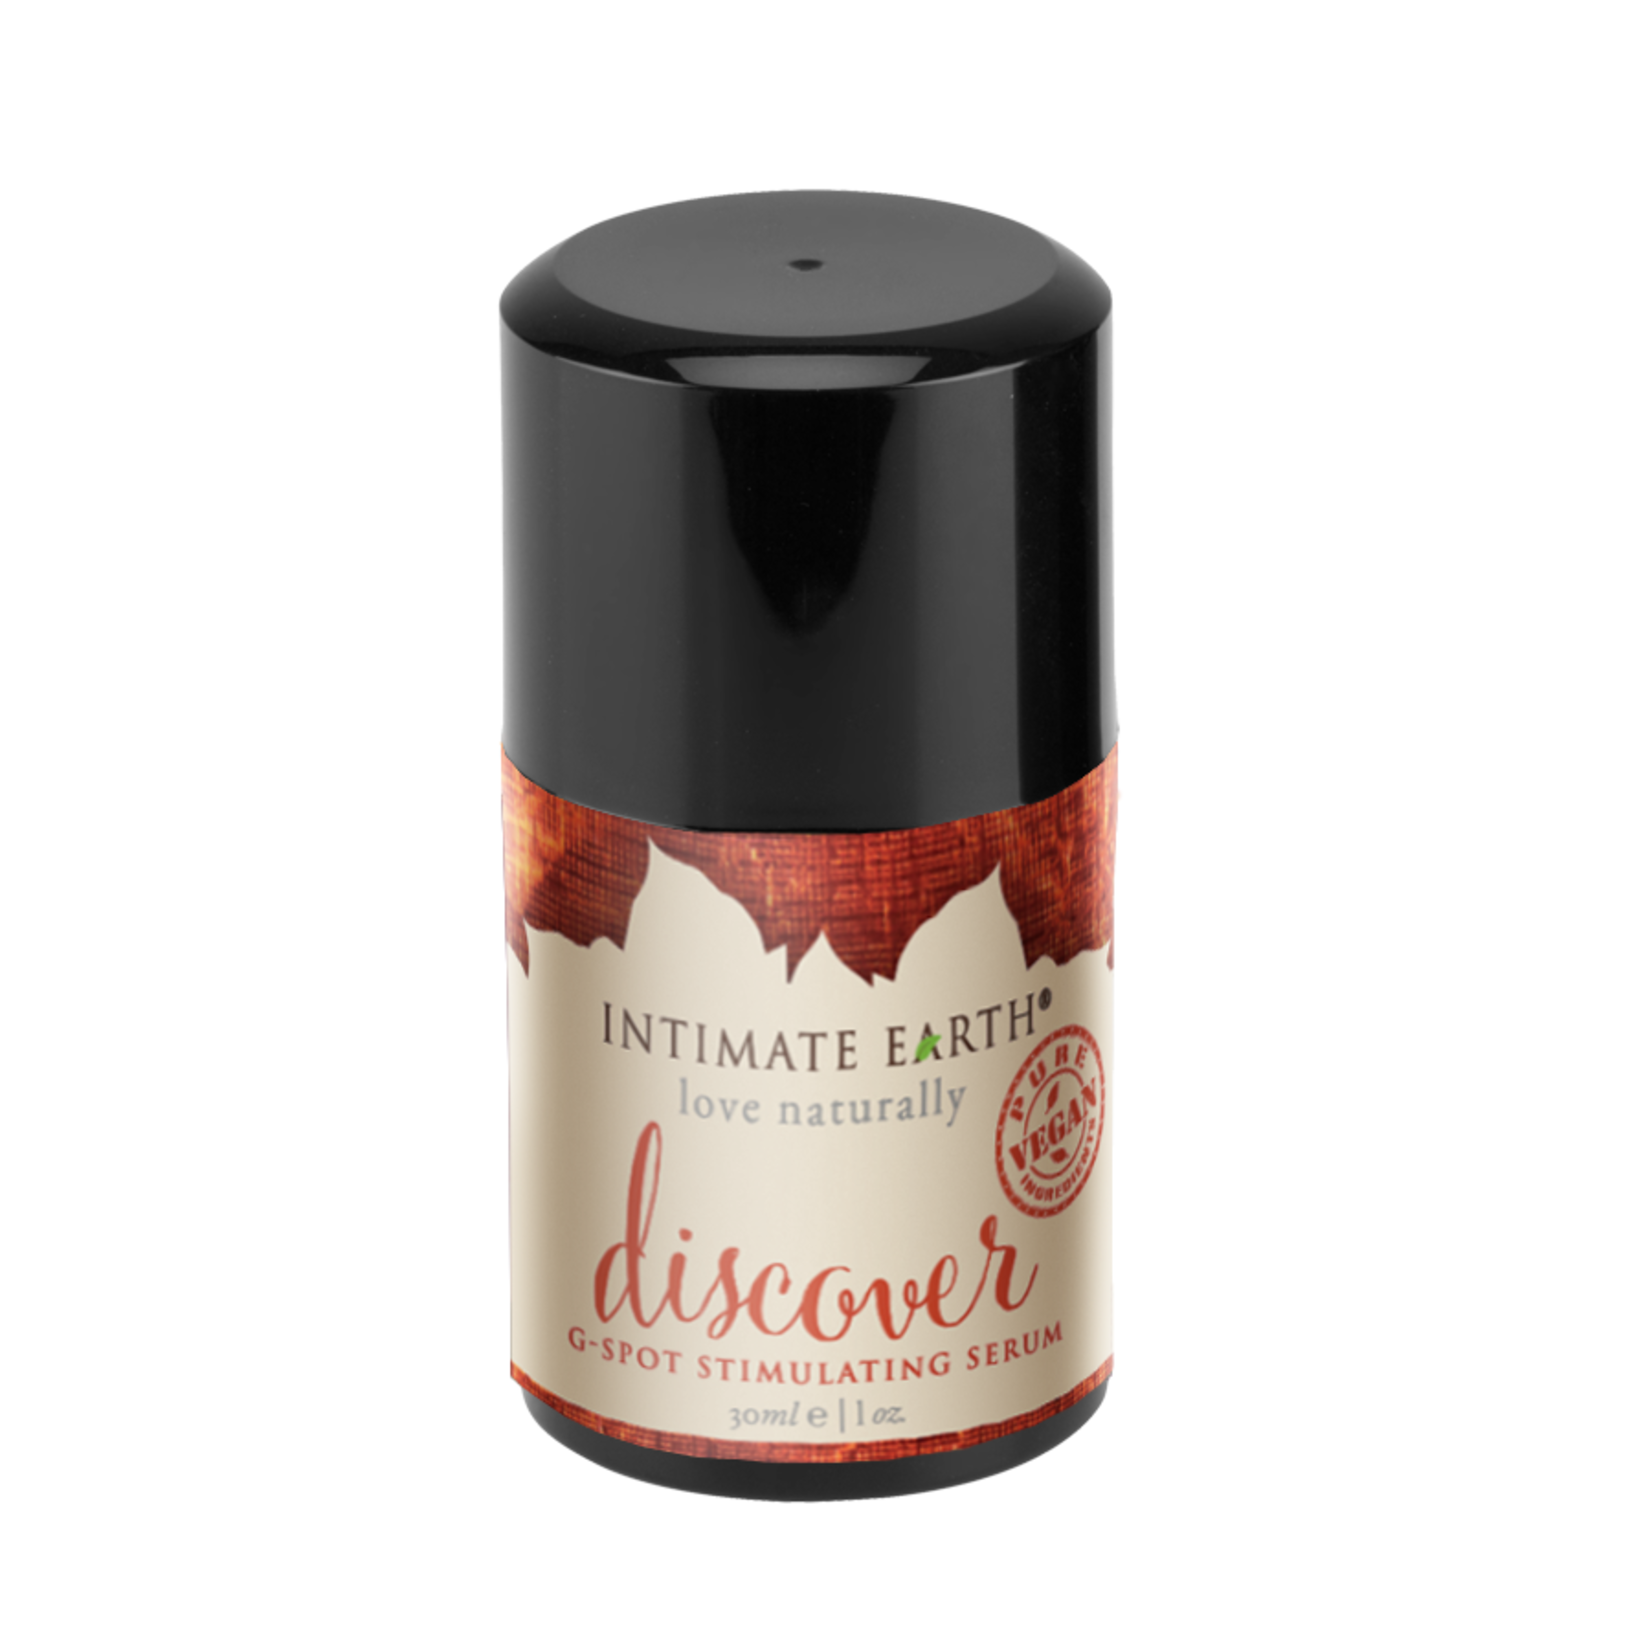 INTIMATE EARTH INTIMATE EARTH - DISCOVER G-SPOT SERUM 30ML